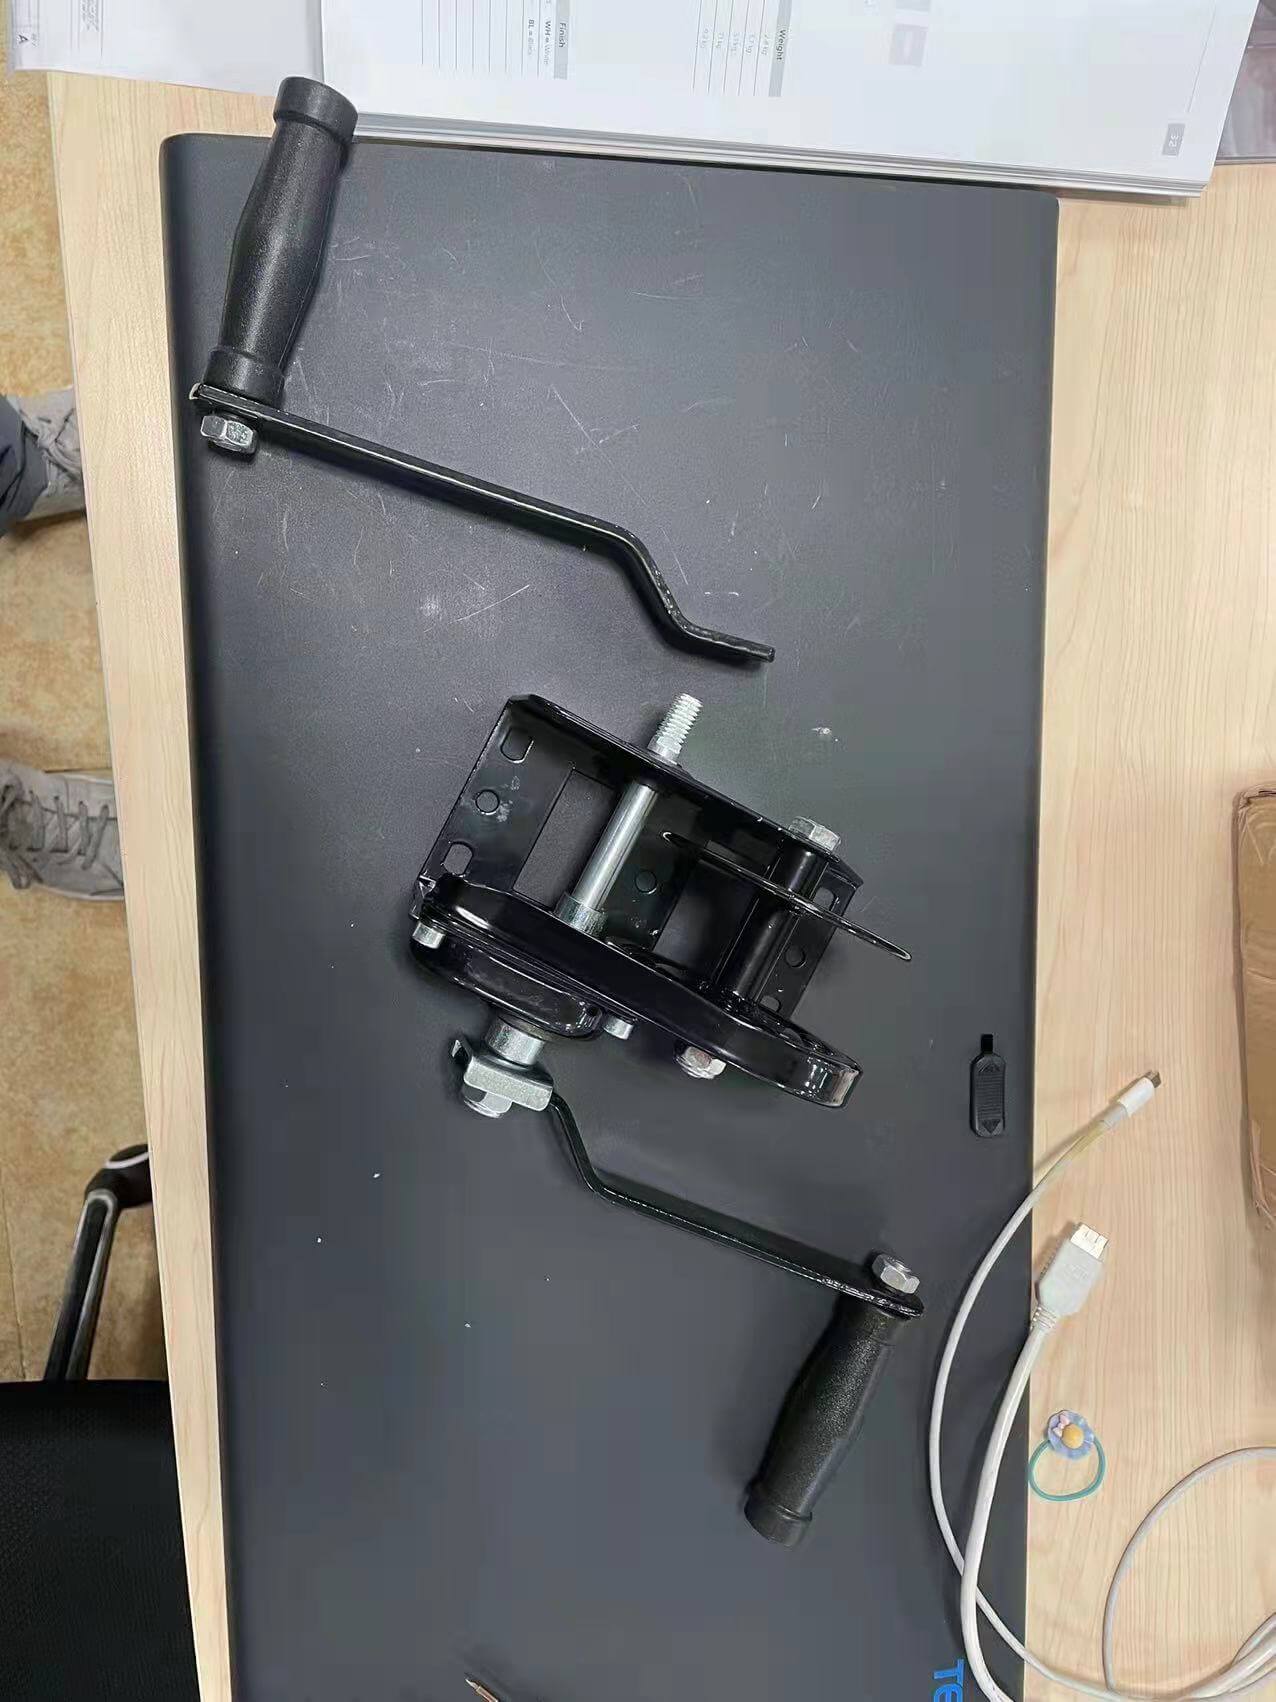 Sample of 800lb double handle manual winch in black color received but missing components to fit the second handle.jpg